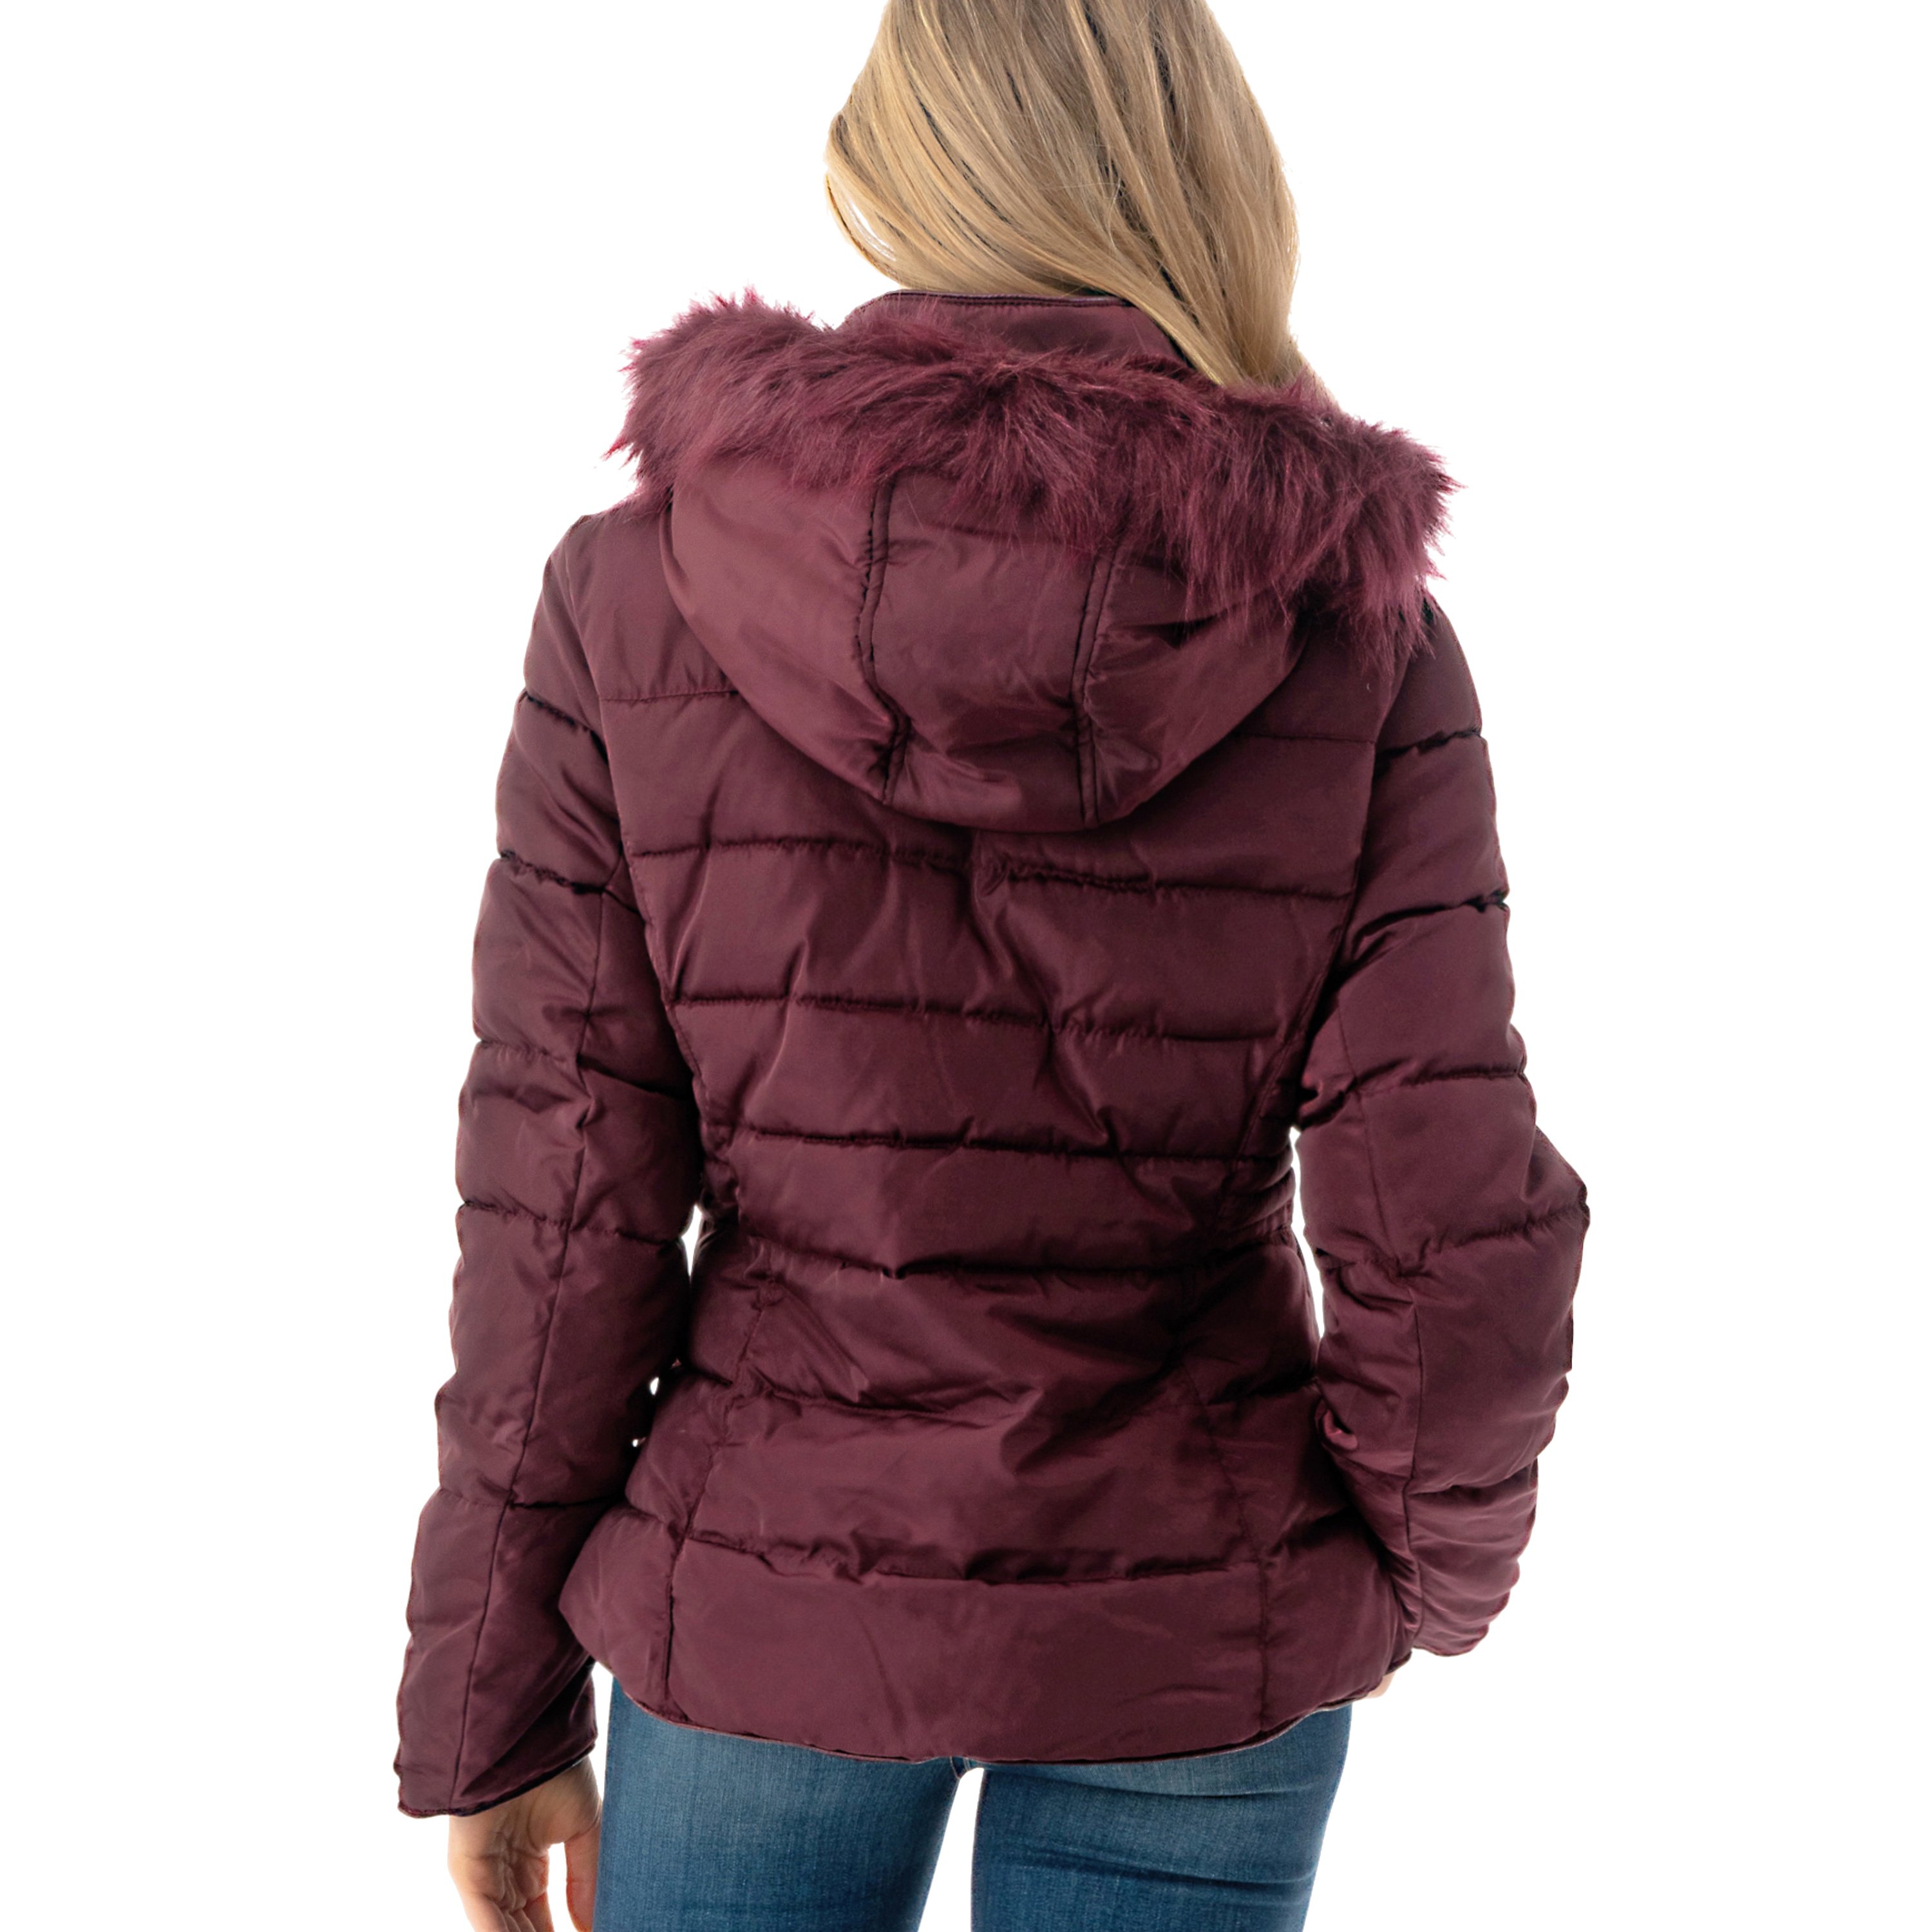 Fashionazzle Women's Short Puffer Coat with Removable Faux Fur Trim Hood Jacket - image 5 of 14